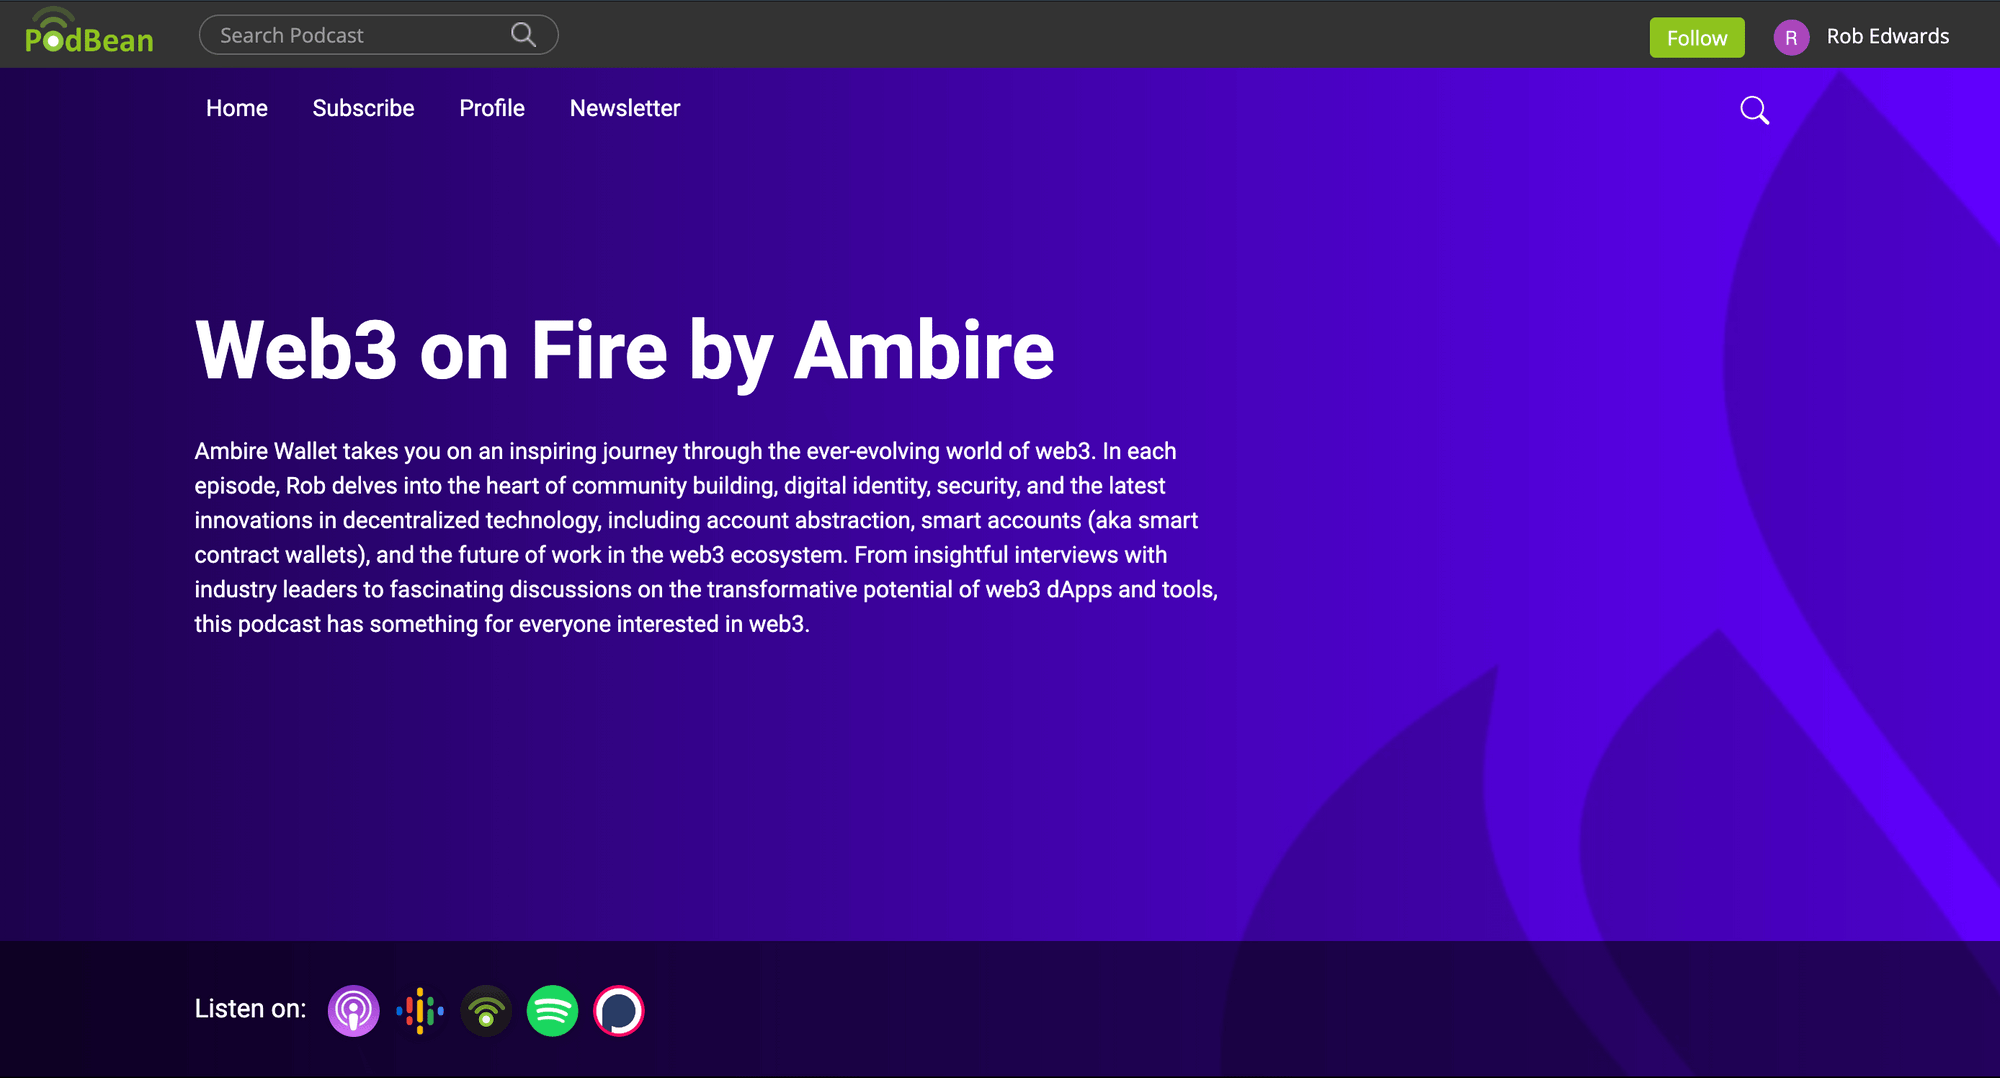 Web3 on Fire podcast by Ambire Wallet